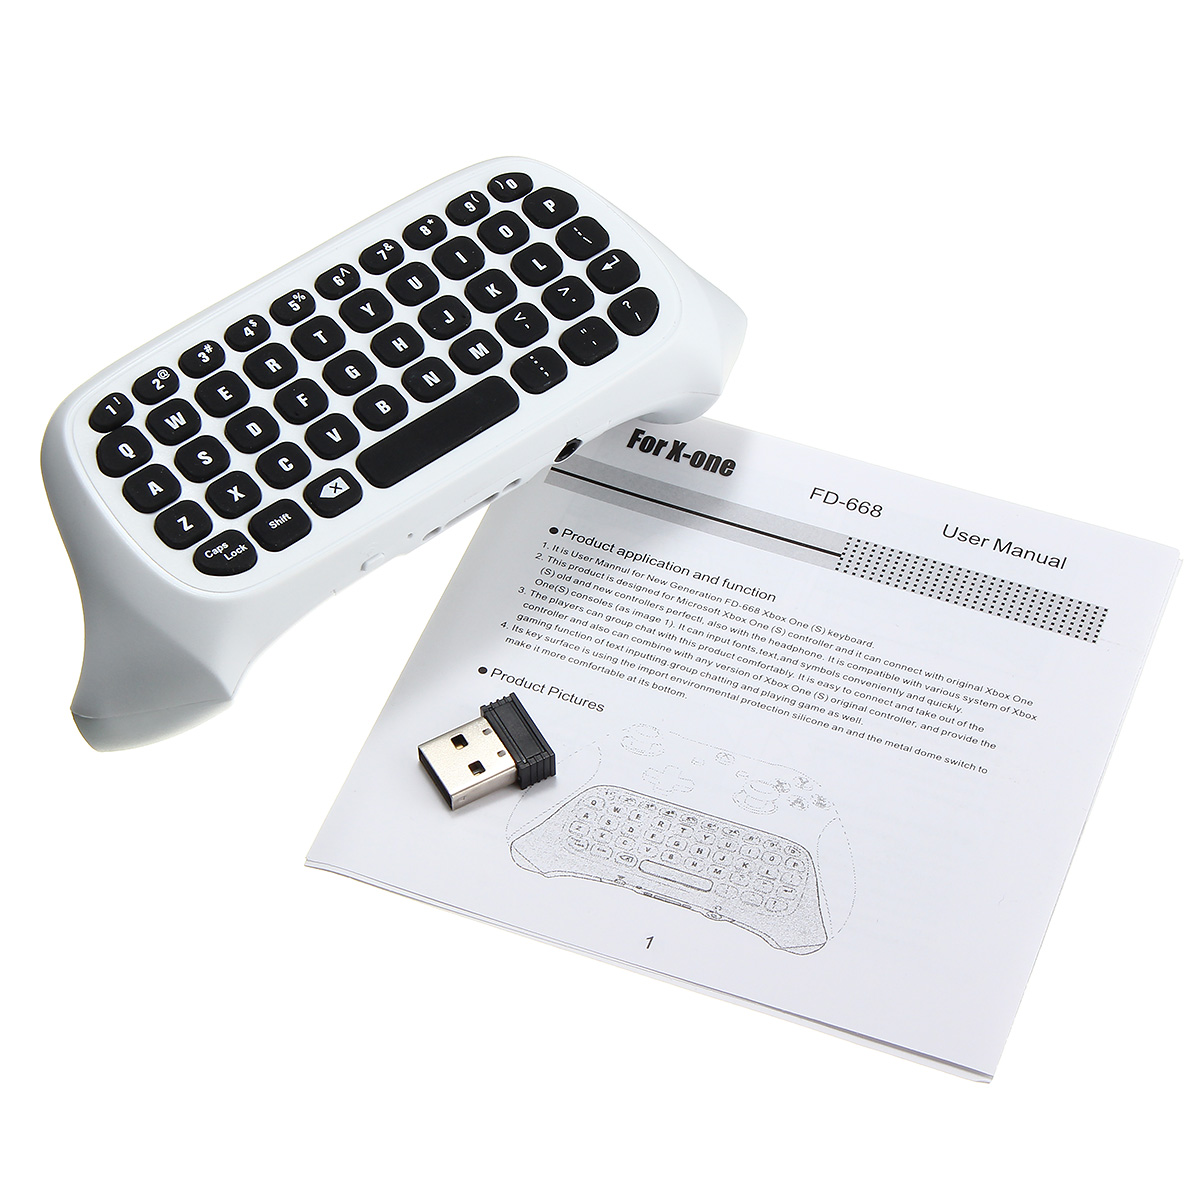 24G-White-Wireless-Message-Chatpad-Keyboard-KeyPad-For-Xbox-One-S-Controller-1162158